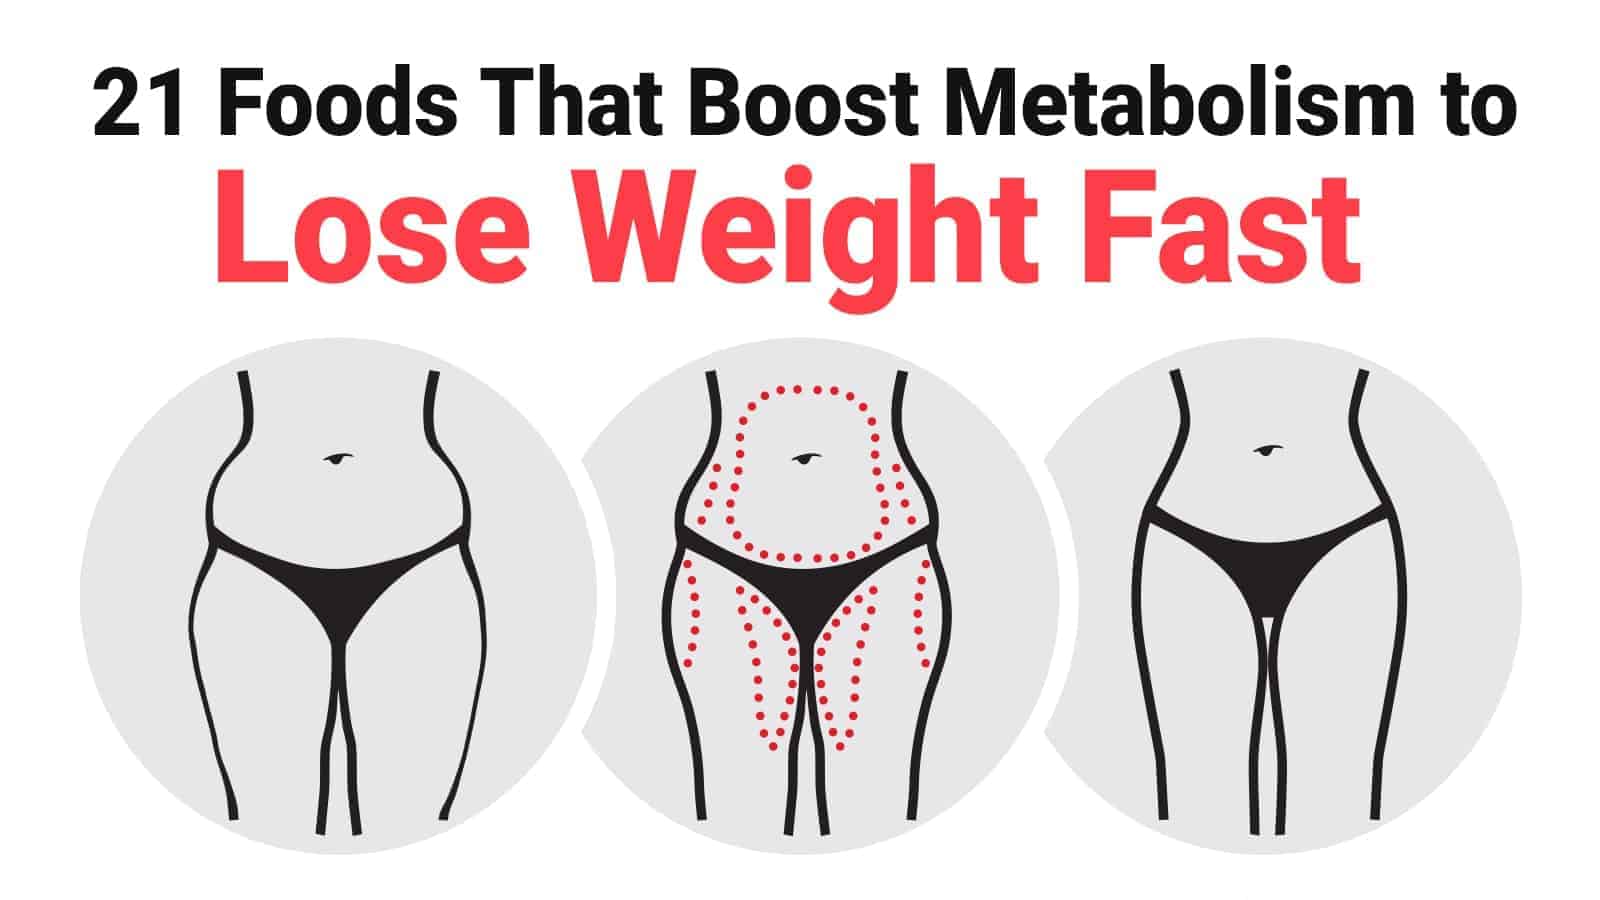 21 Foods That Boost Metabolism to Lose Weight Fast